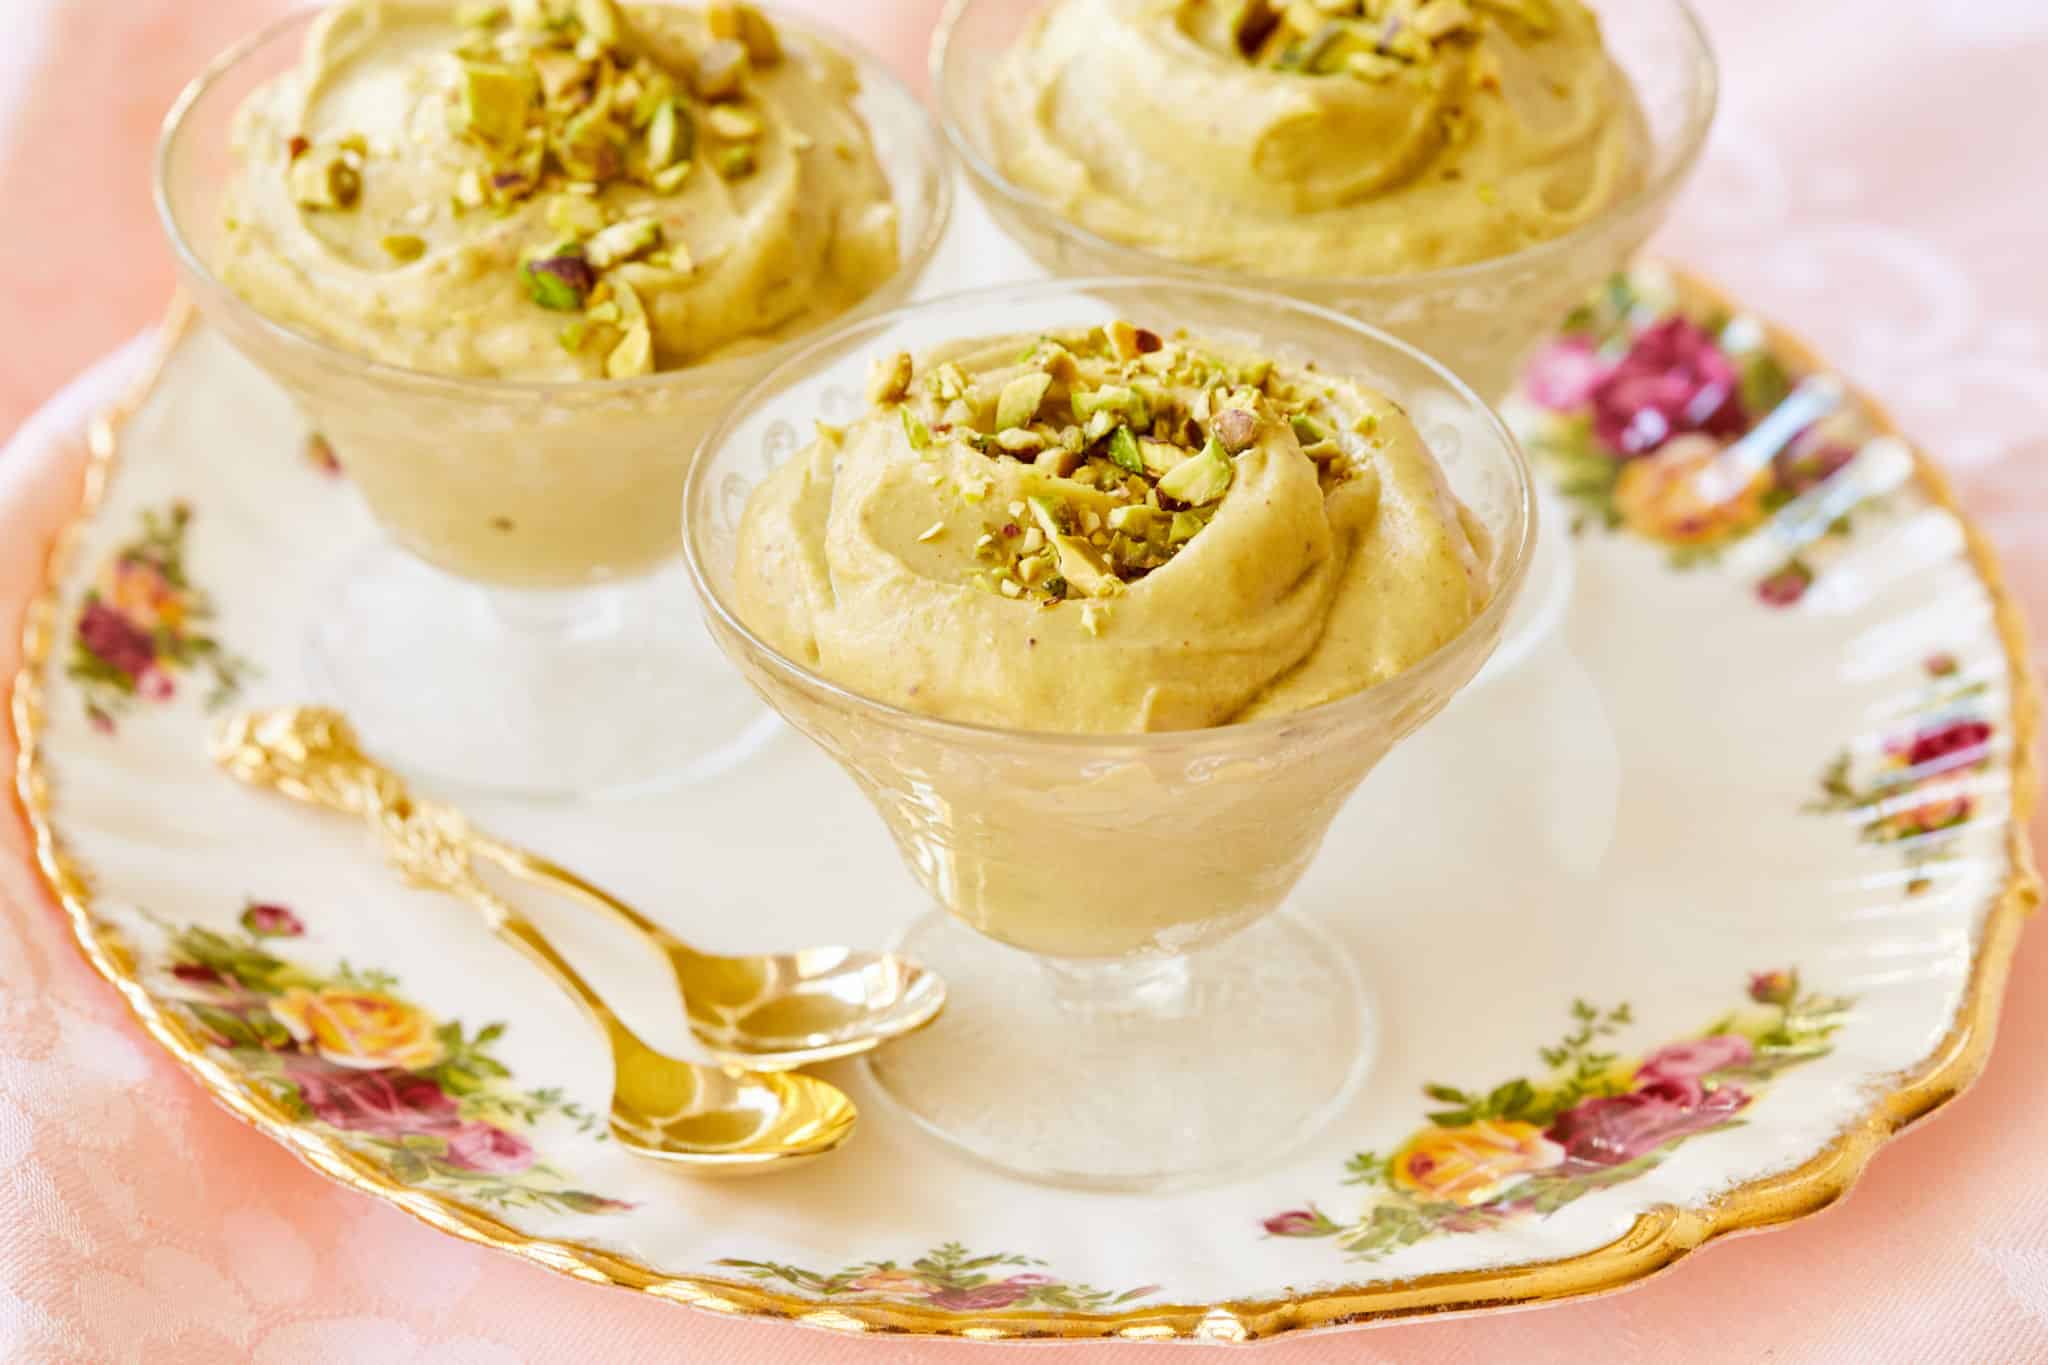 Serving dishes filled with pistachio pudding